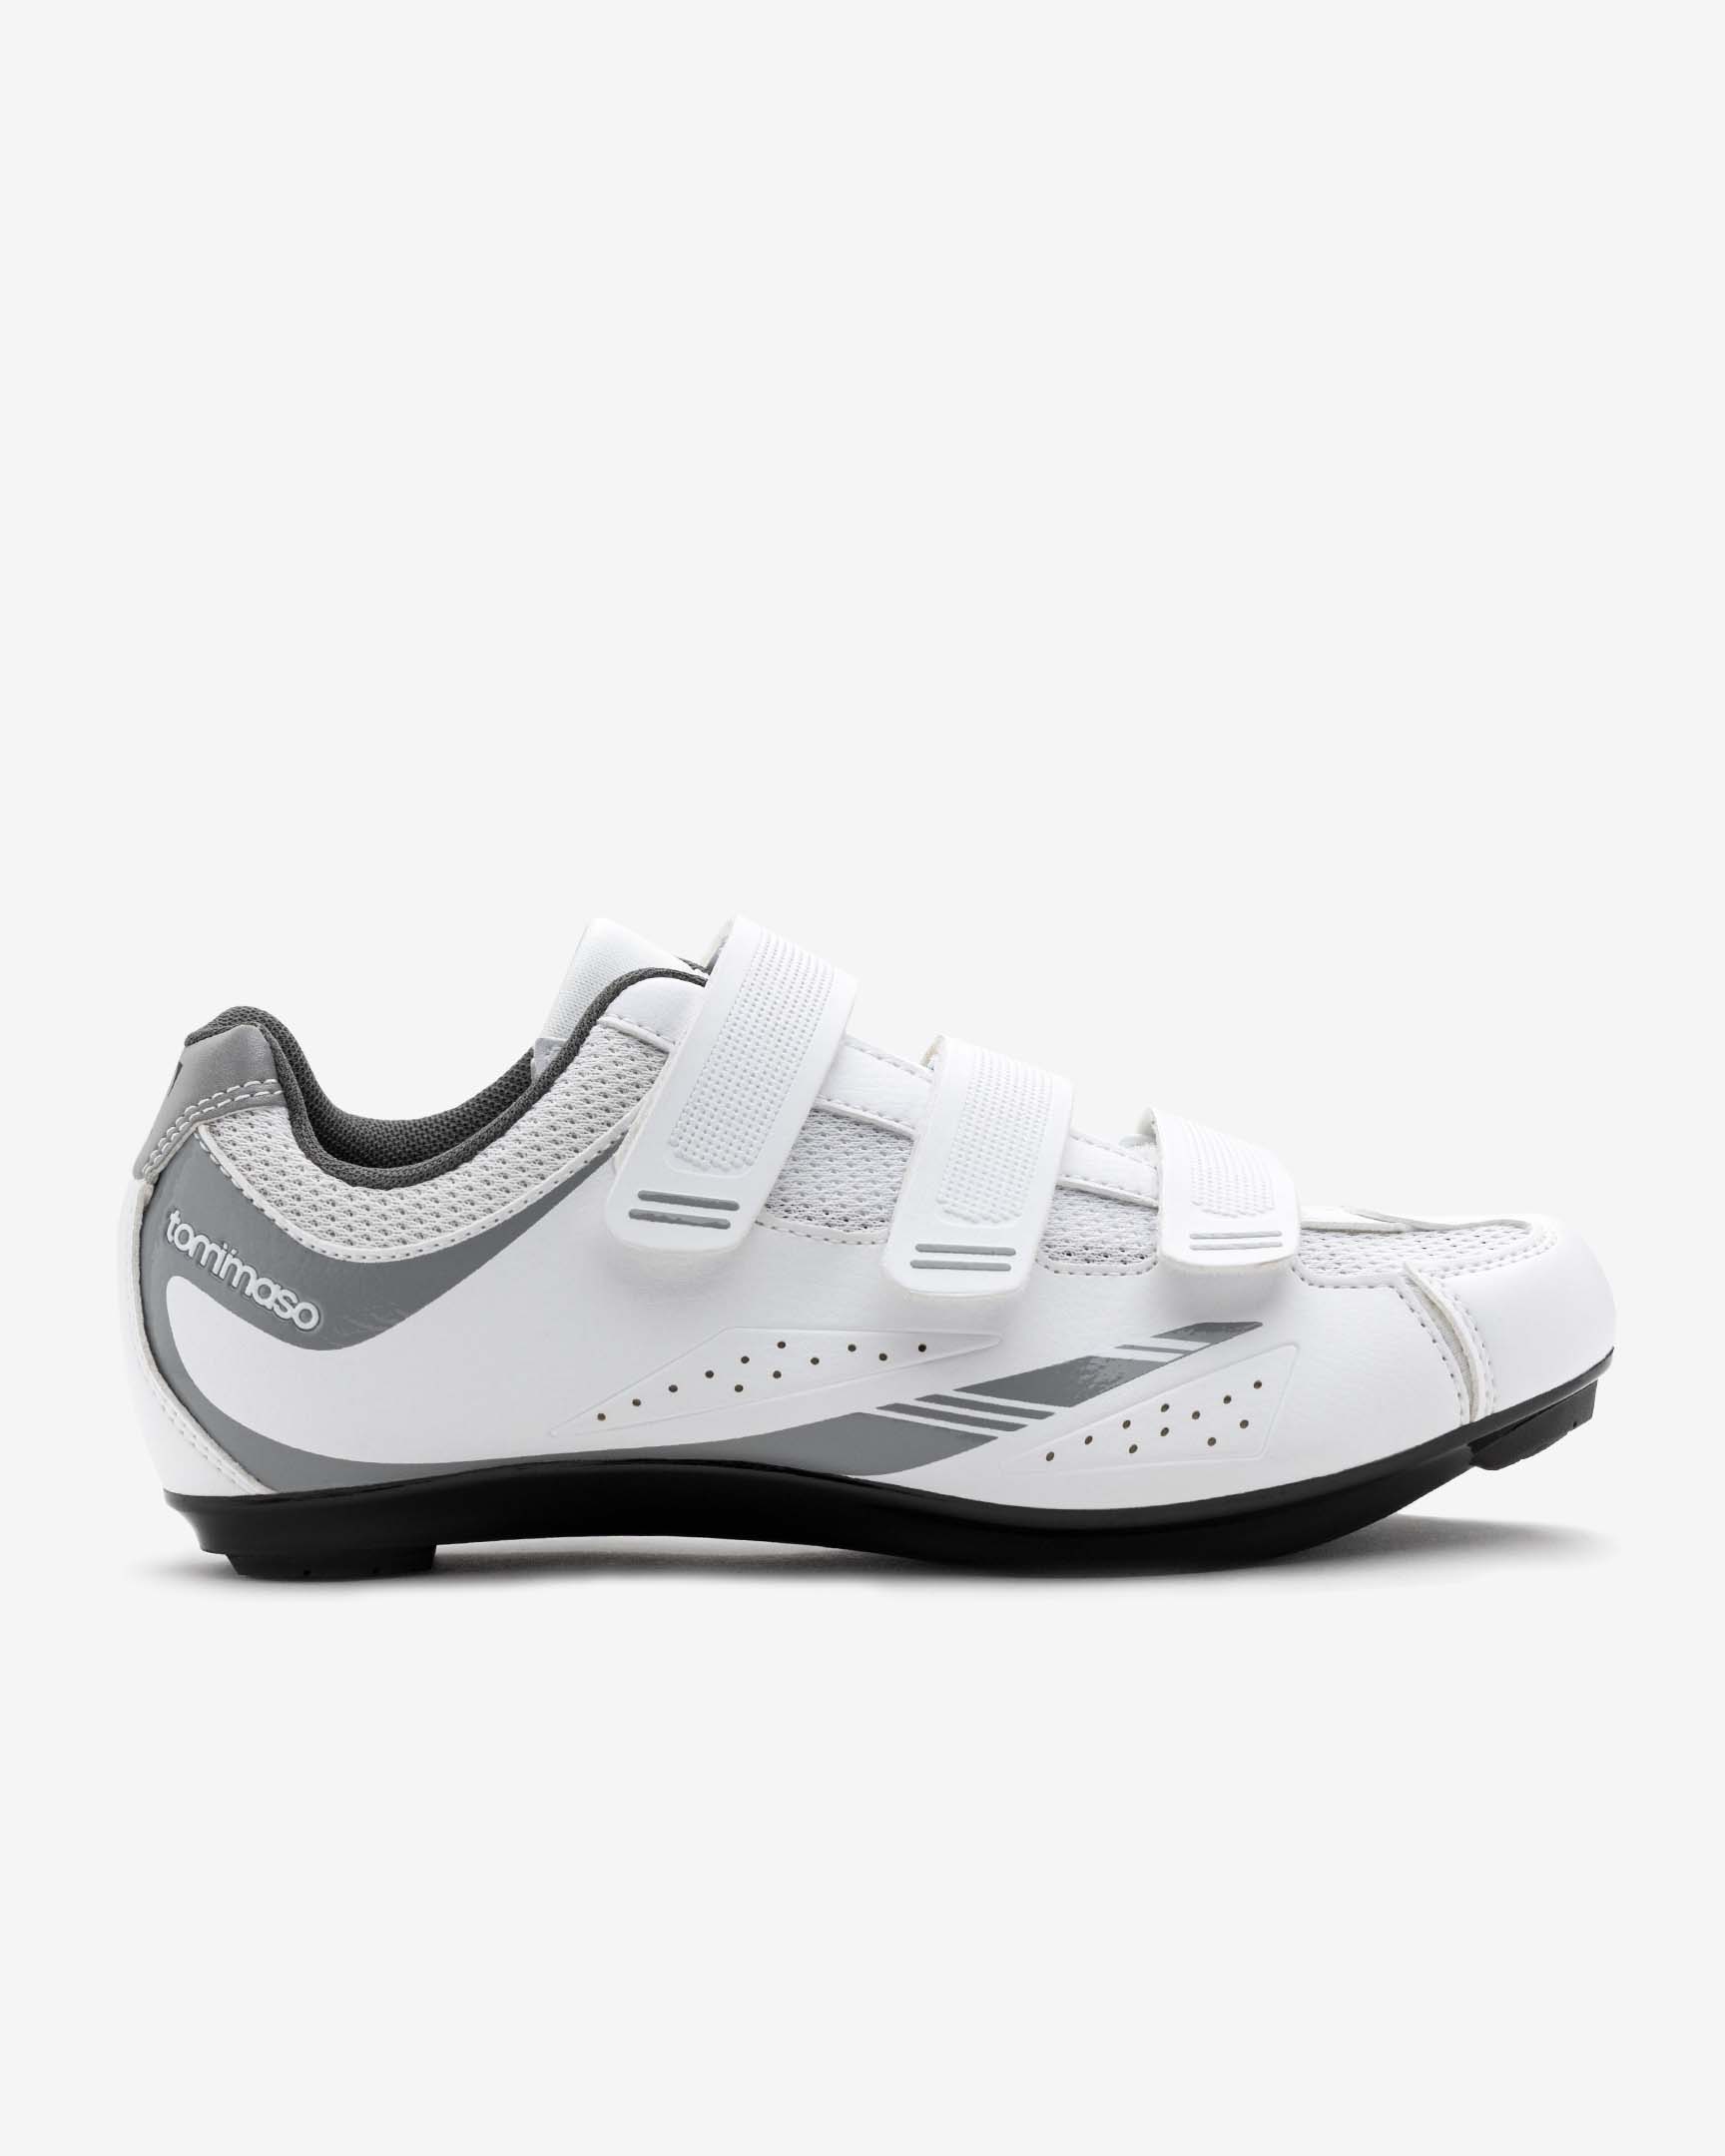 Tommaso Womens Cycling Shoes Size 11 Pista and 50 similar items